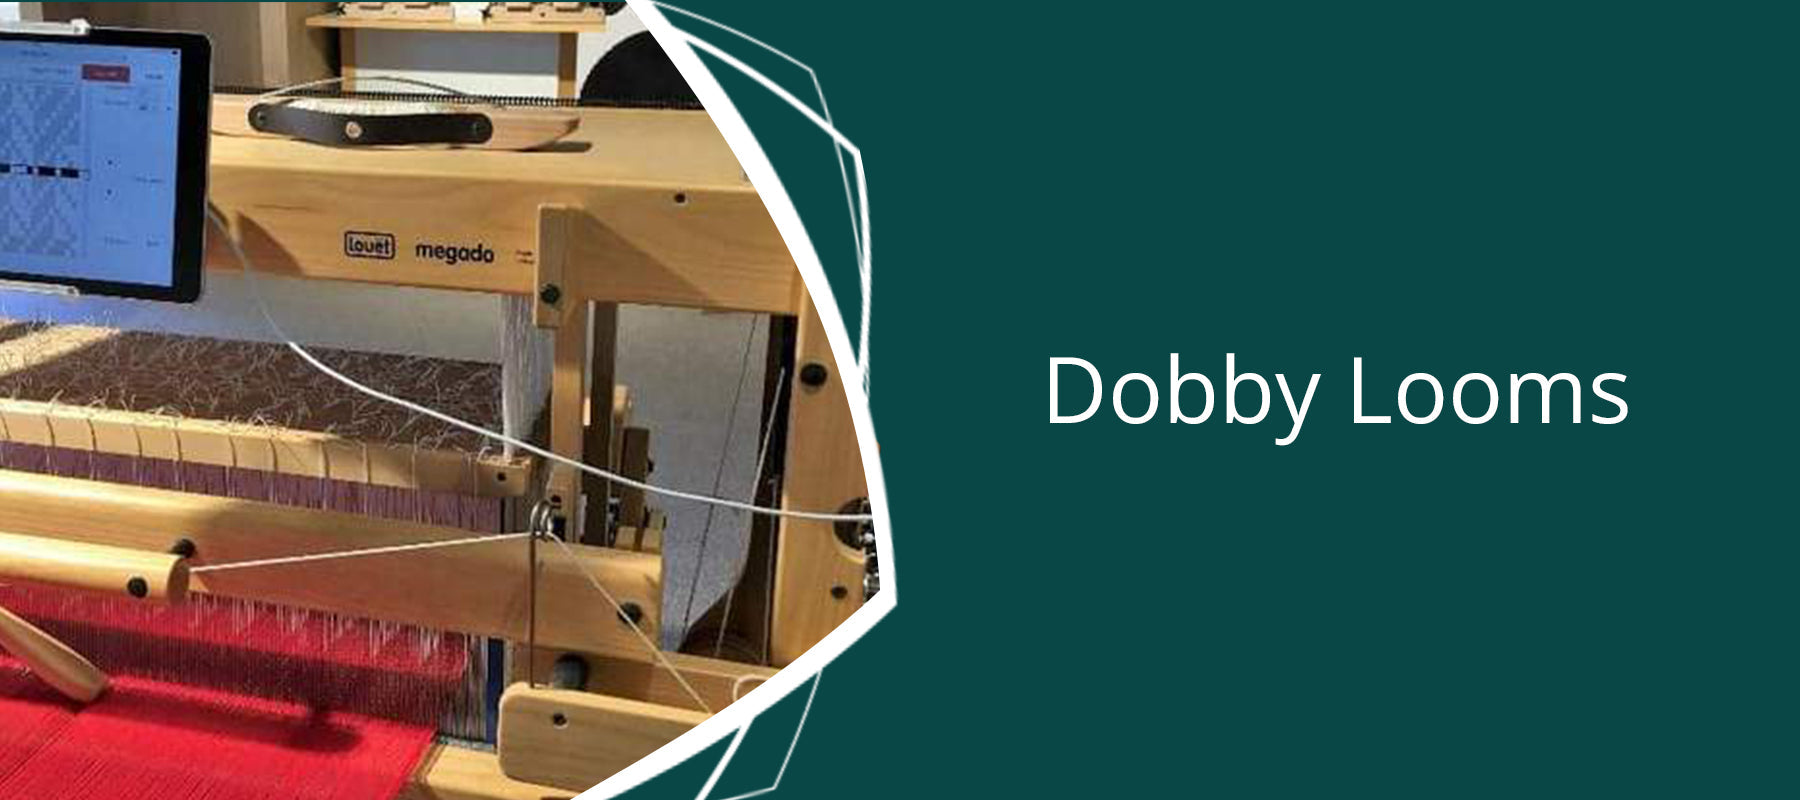 Dobby Looms: Computer and Mechanical